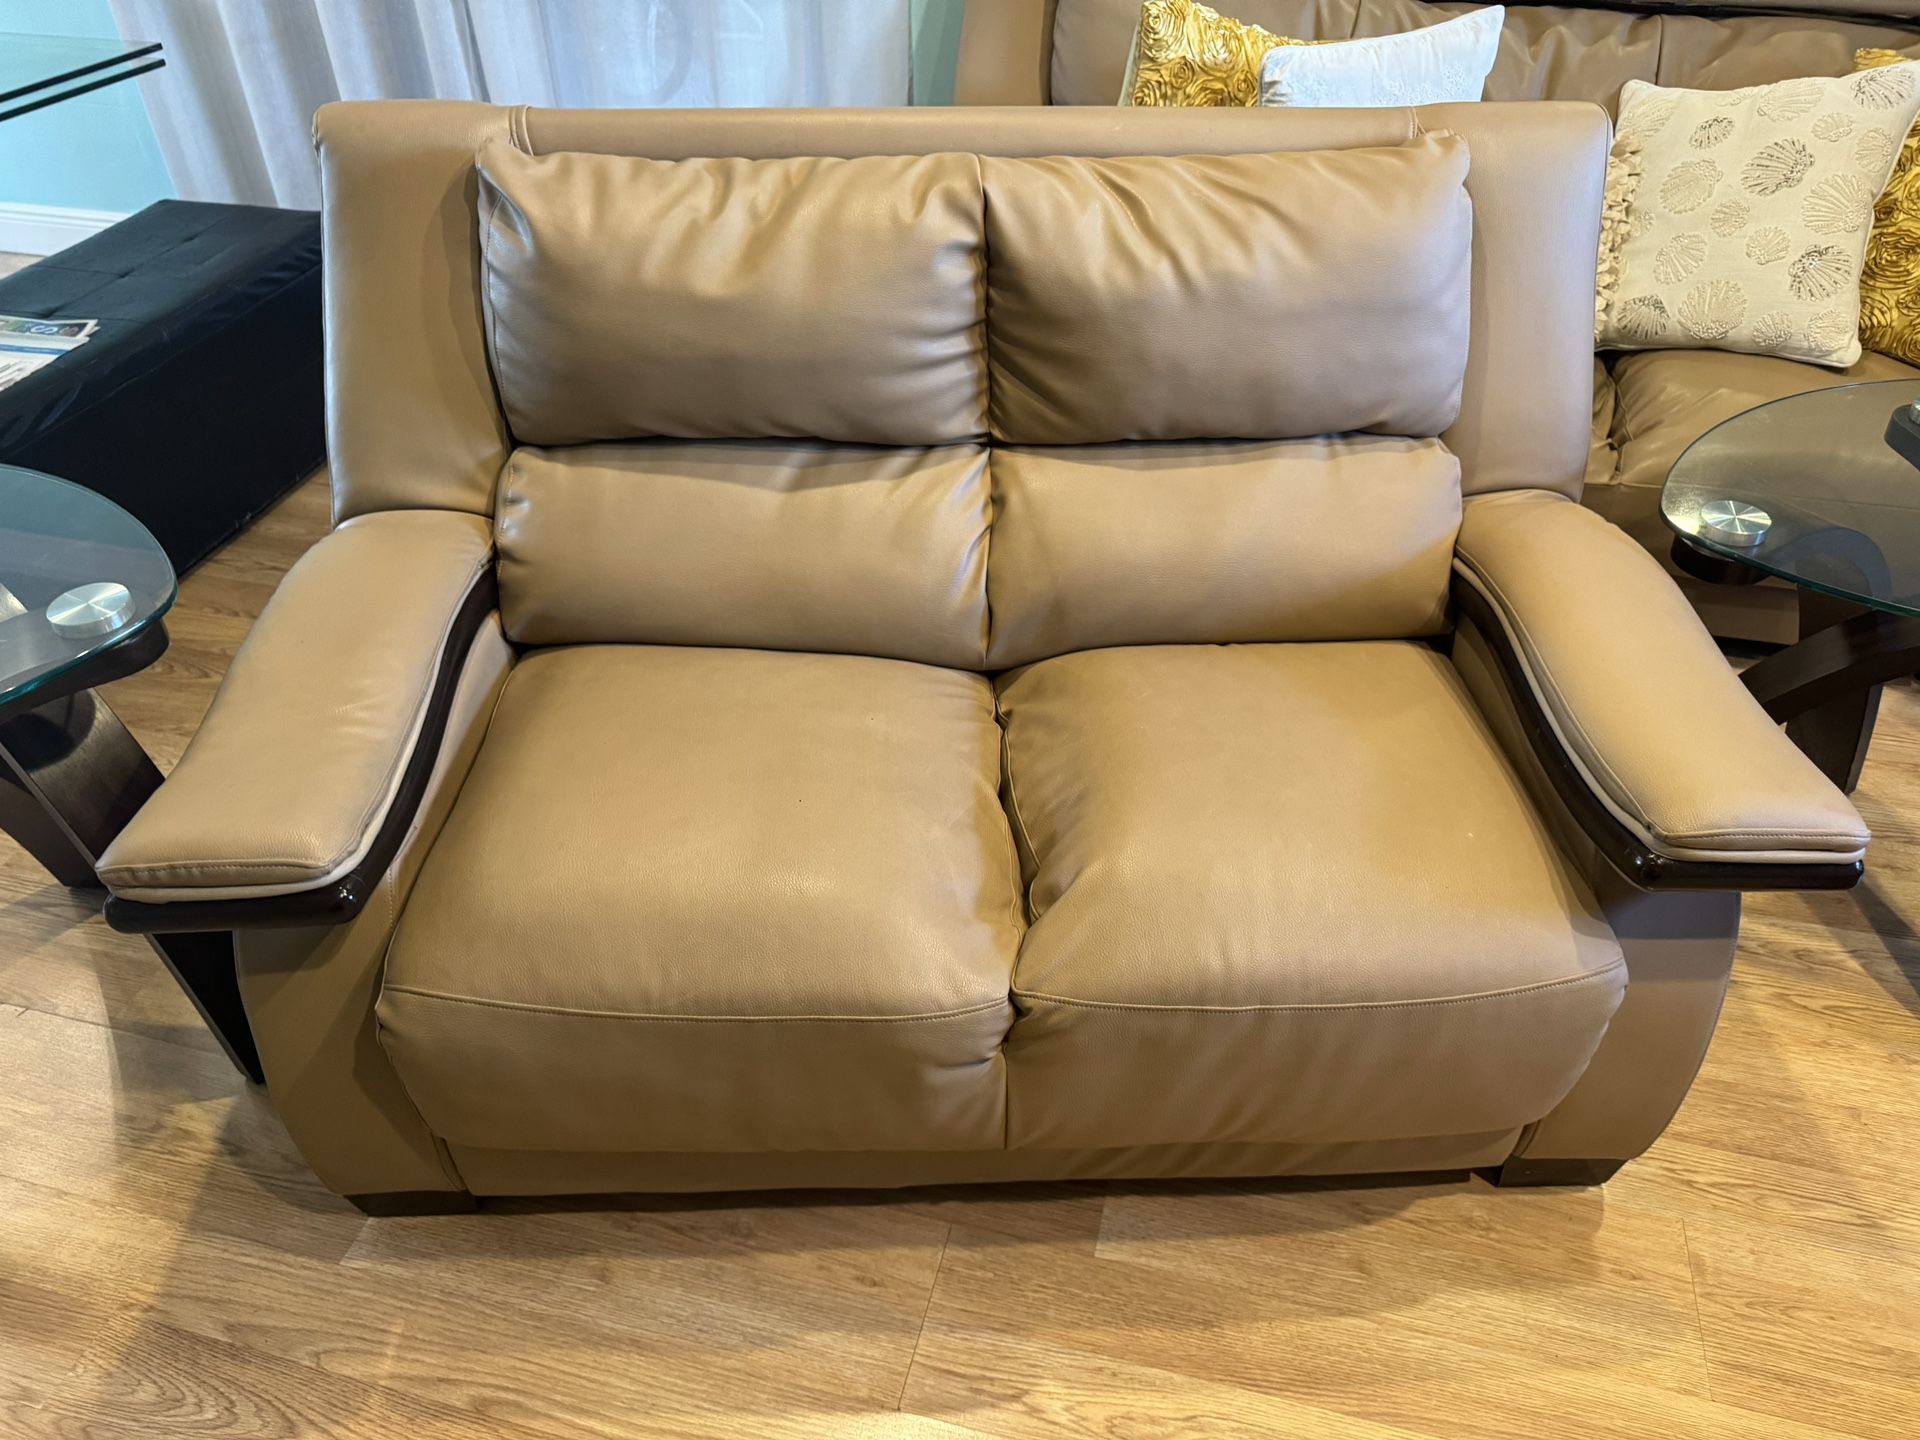 Loveseat Leather Couch / Sofa